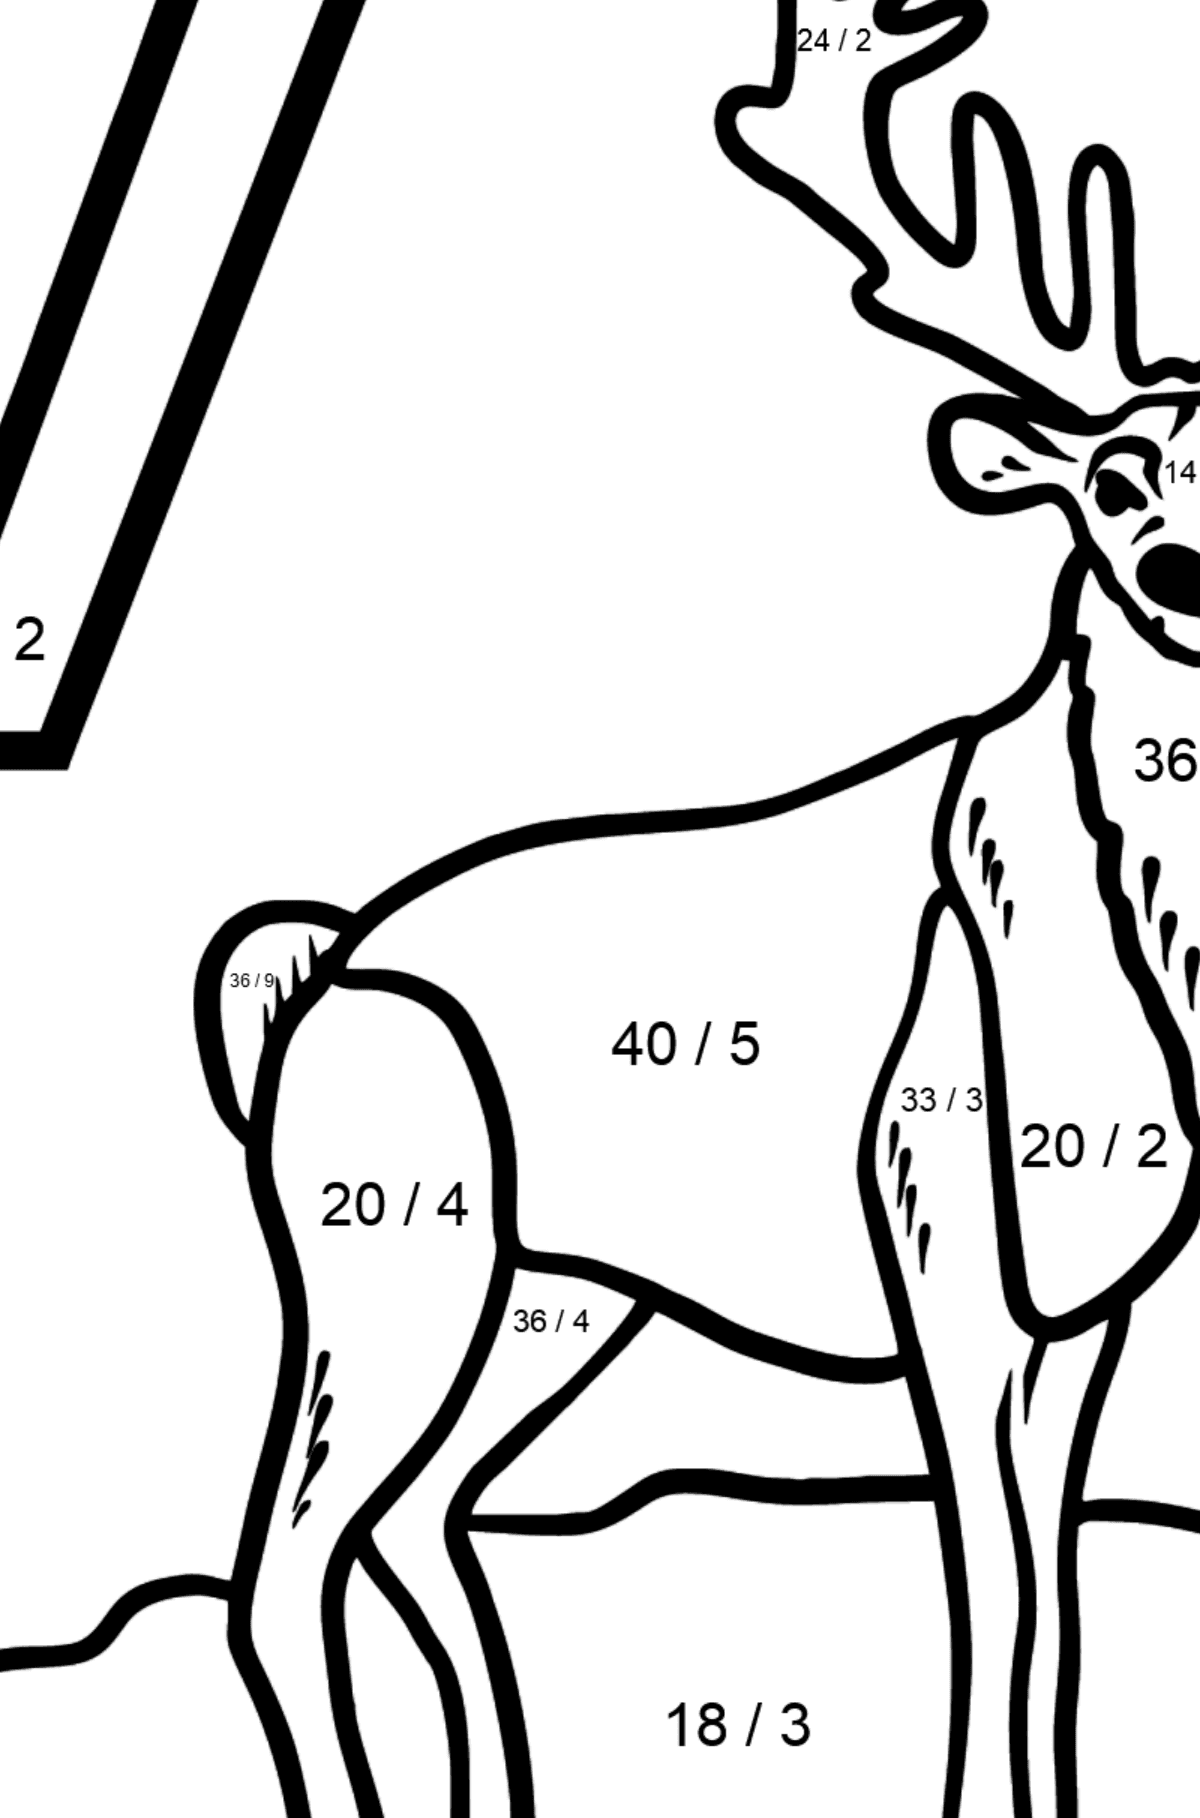 Portuguese Letter V coloring pages - VEADO - Math Coloring - Division for Kids